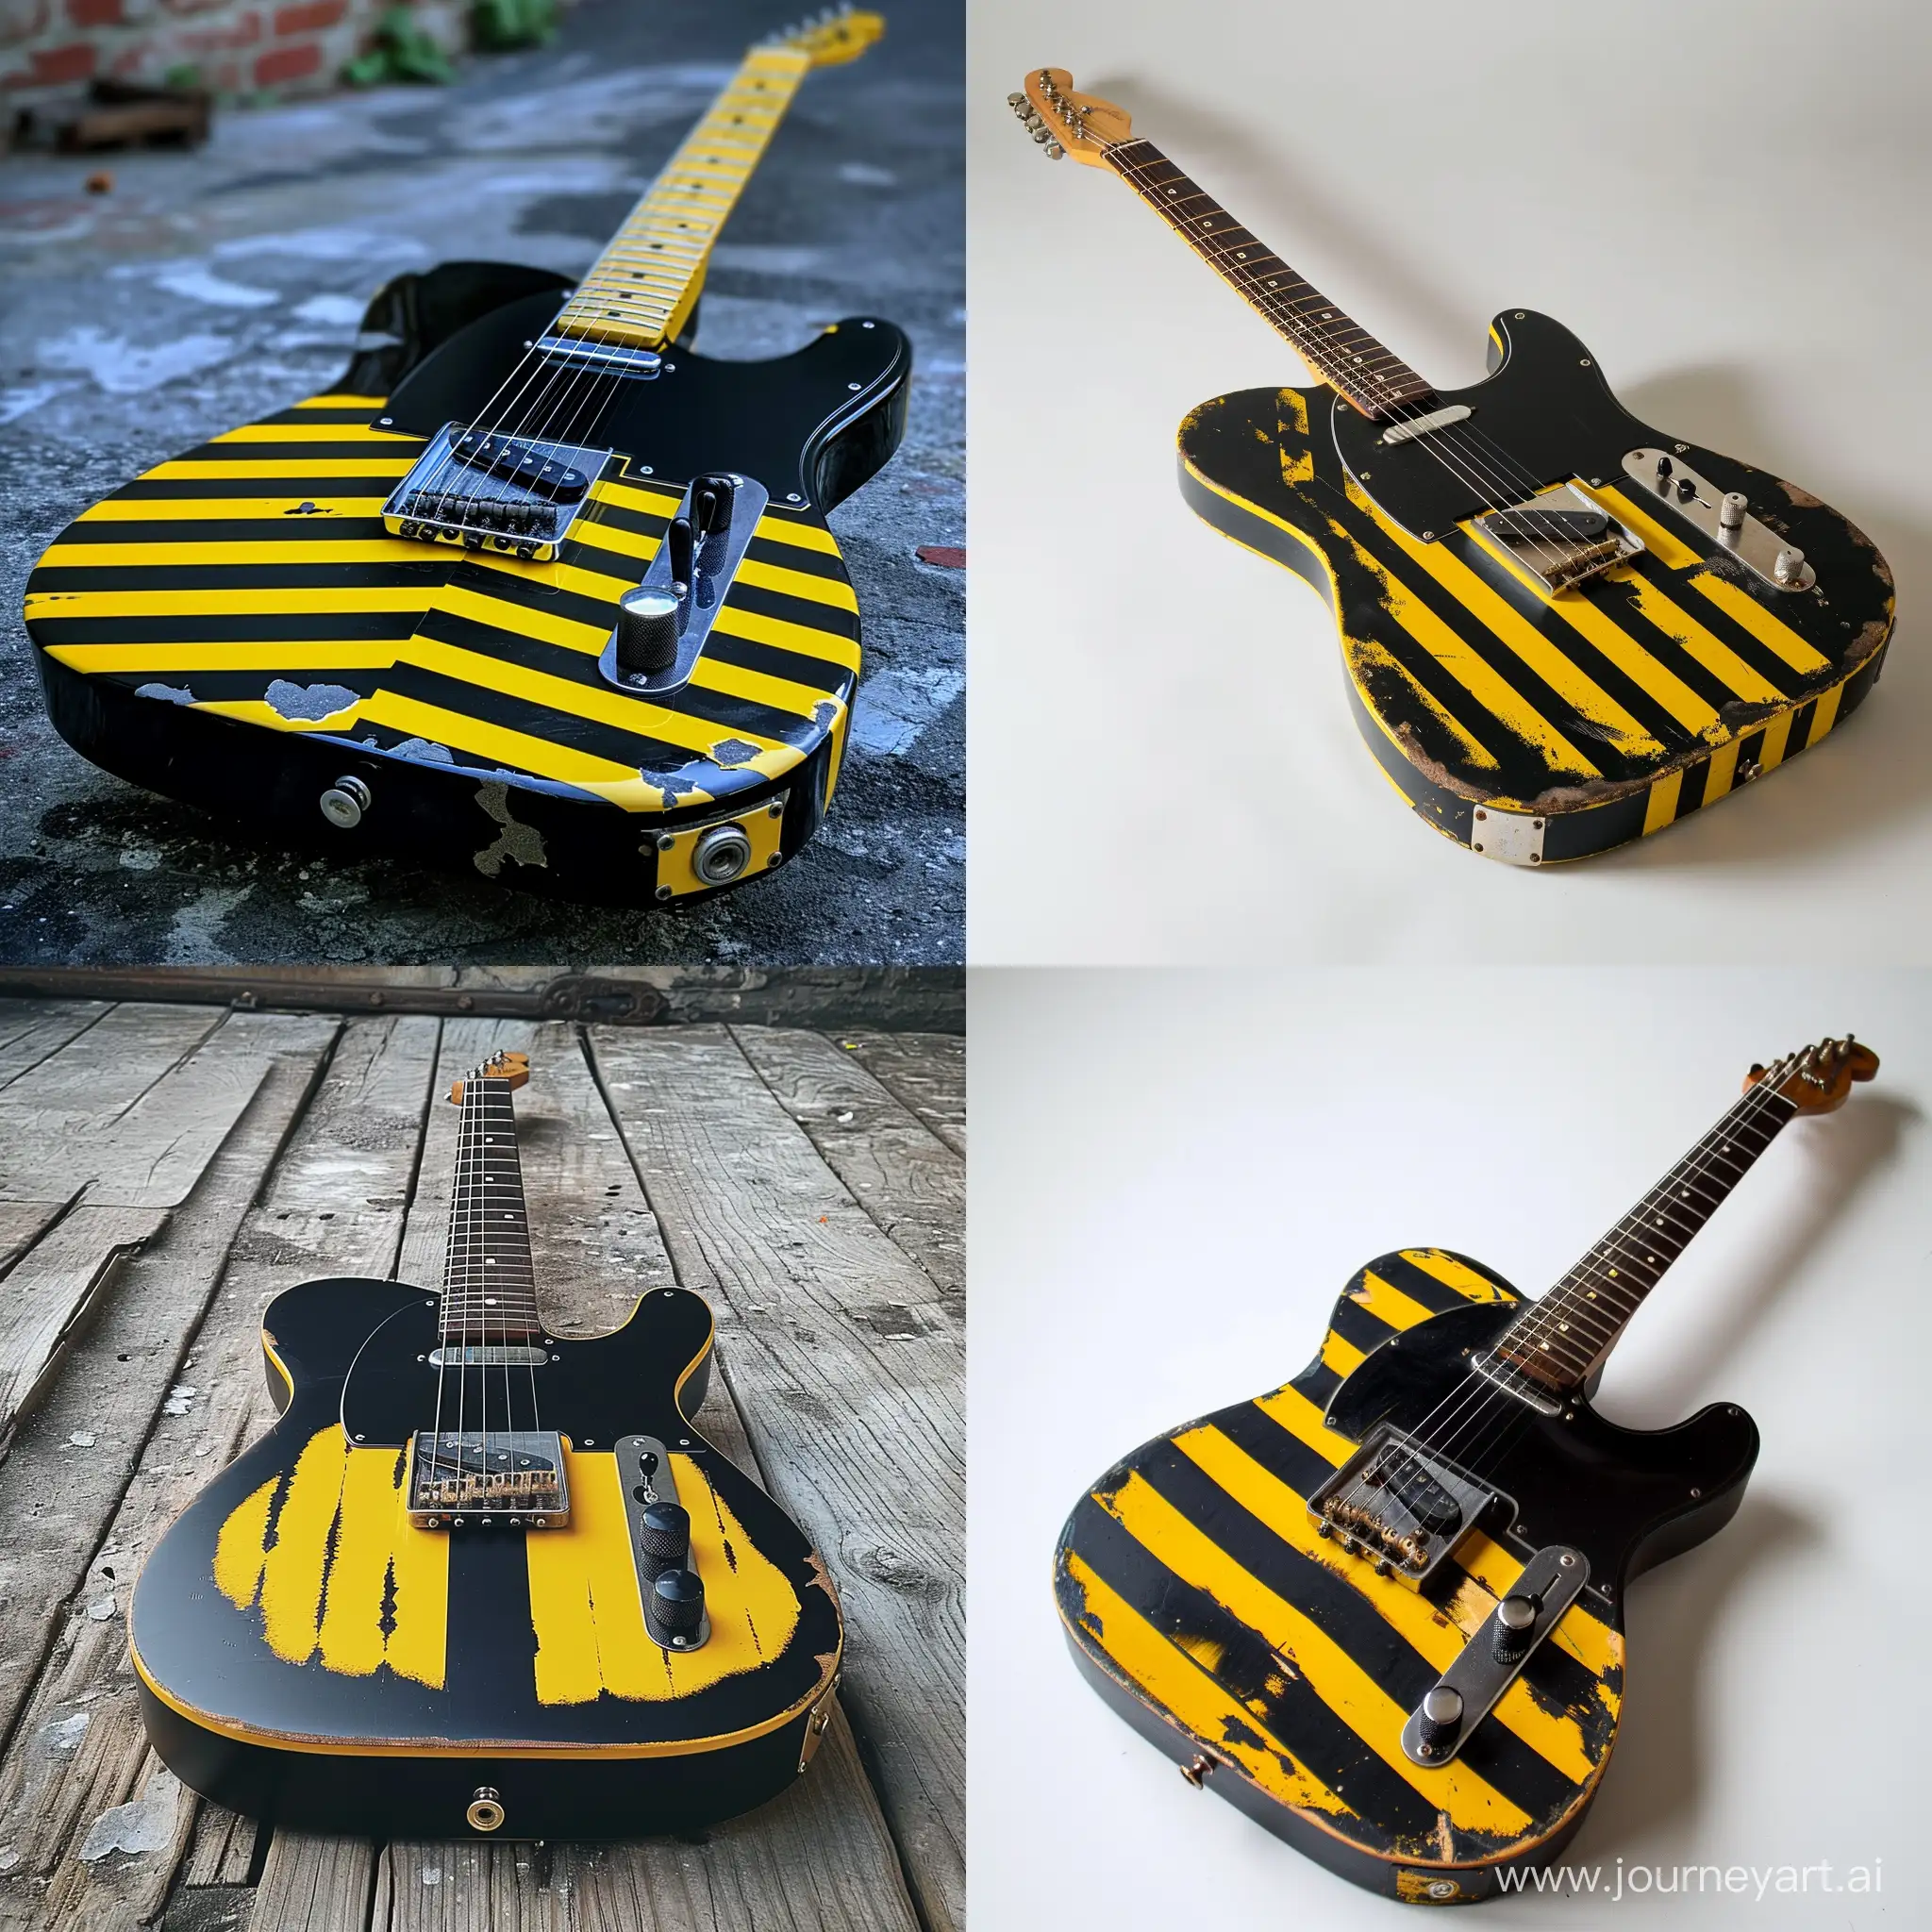 Bold-Black-and-Yellow-Striped-Fender-Telecaster-Guitar